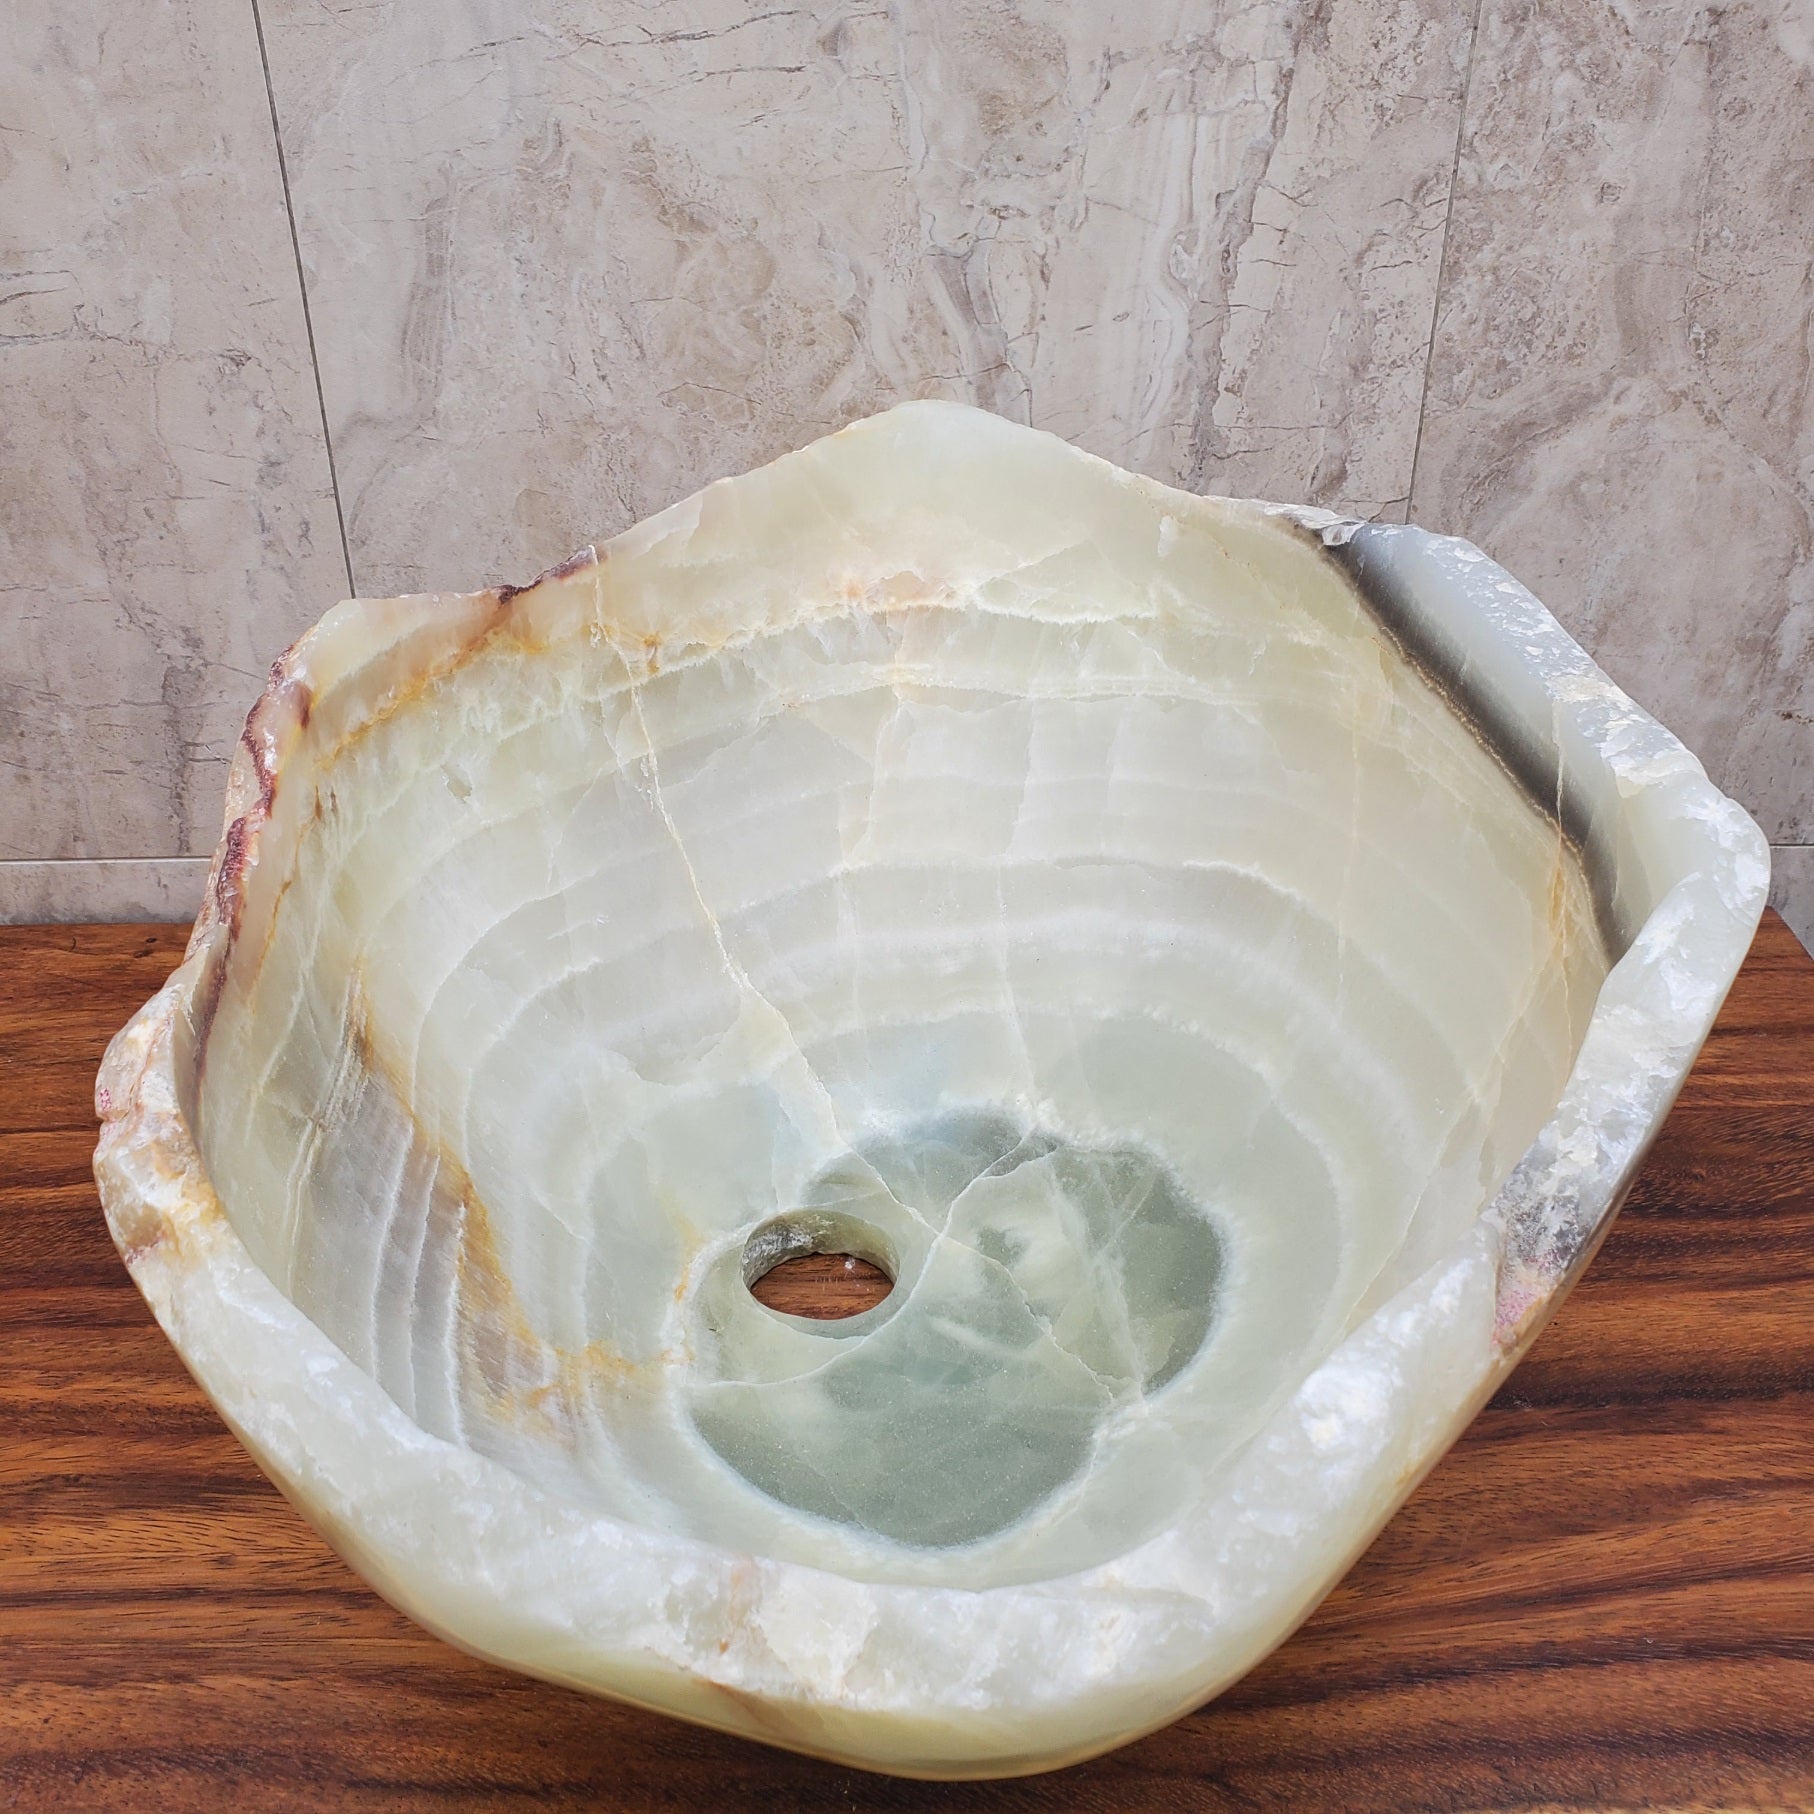 Green and White Onyx Vessel Sink. Handmade in Mexico. Hand-finished and ships from the USA. Buy now at www.felipeandgrace.com. 